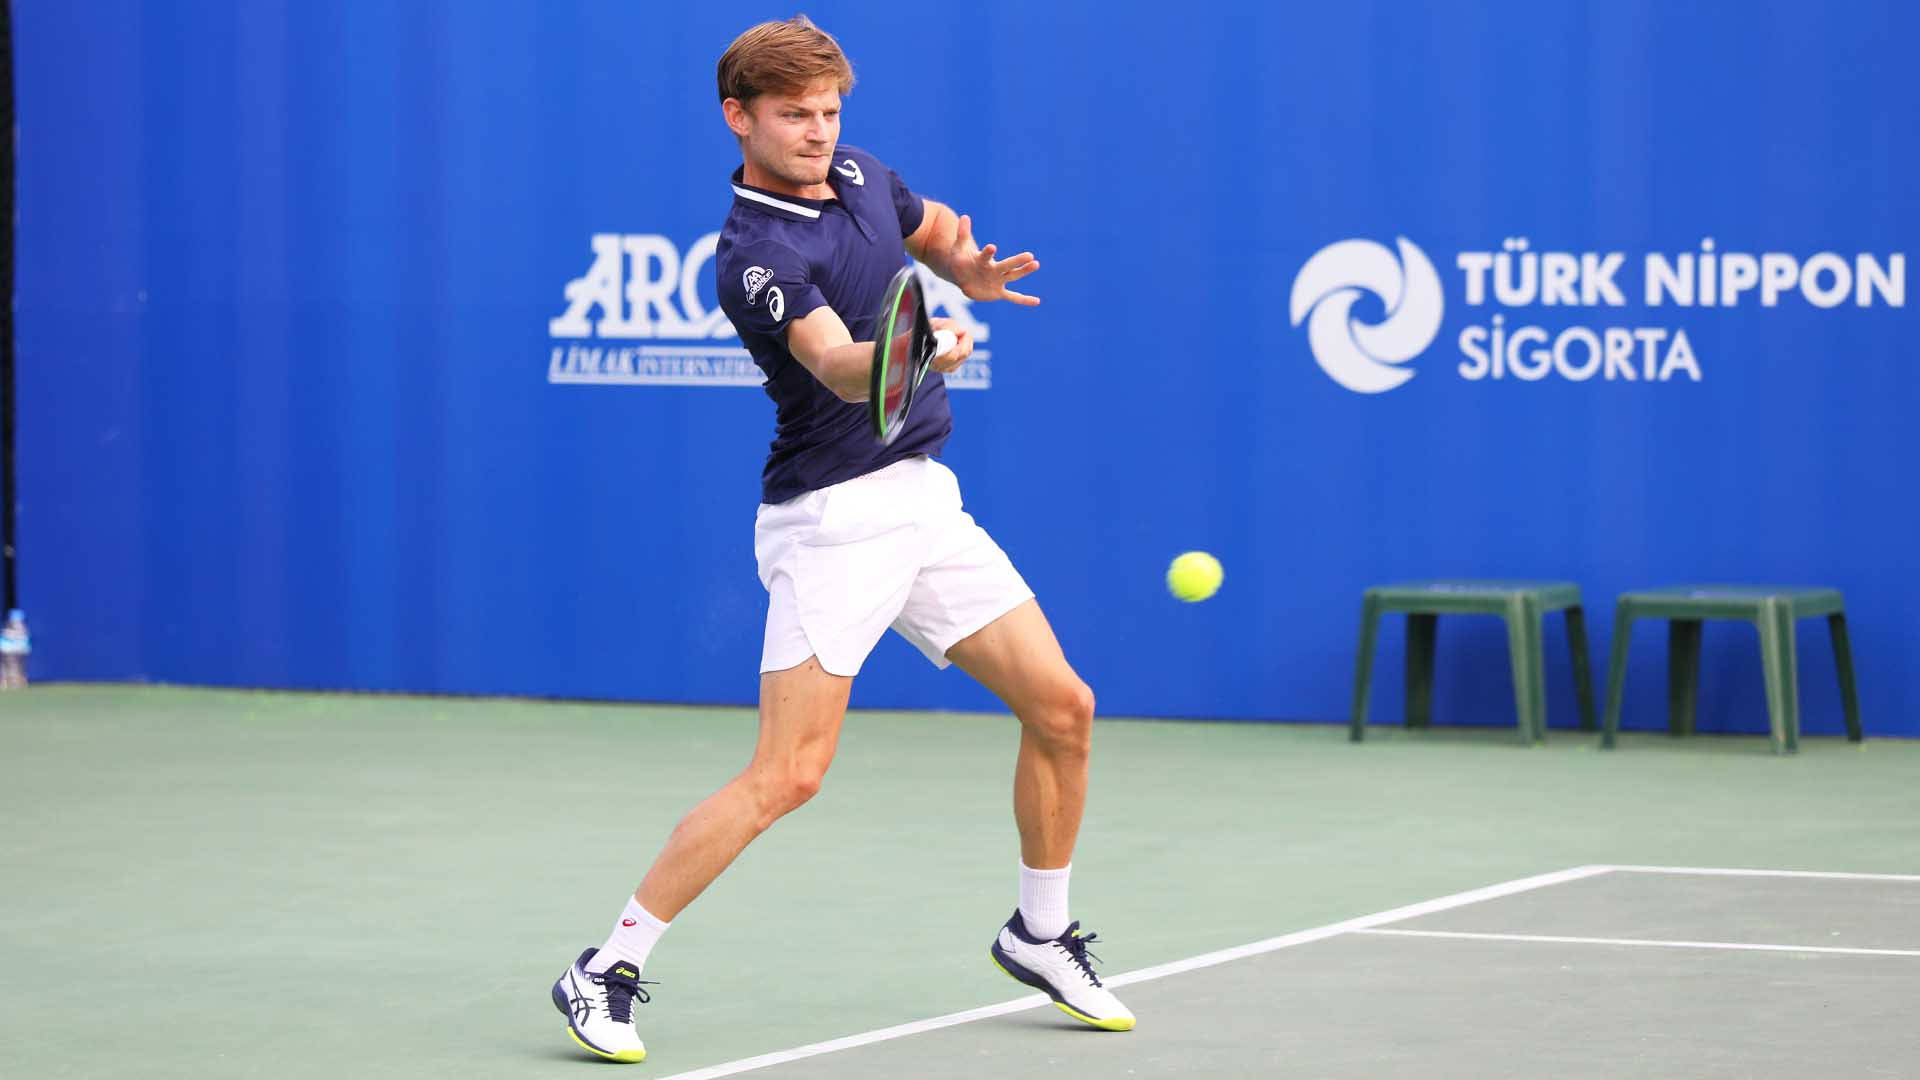 Professional Tennis Player David Goffin in Action on the Court Wallpaper